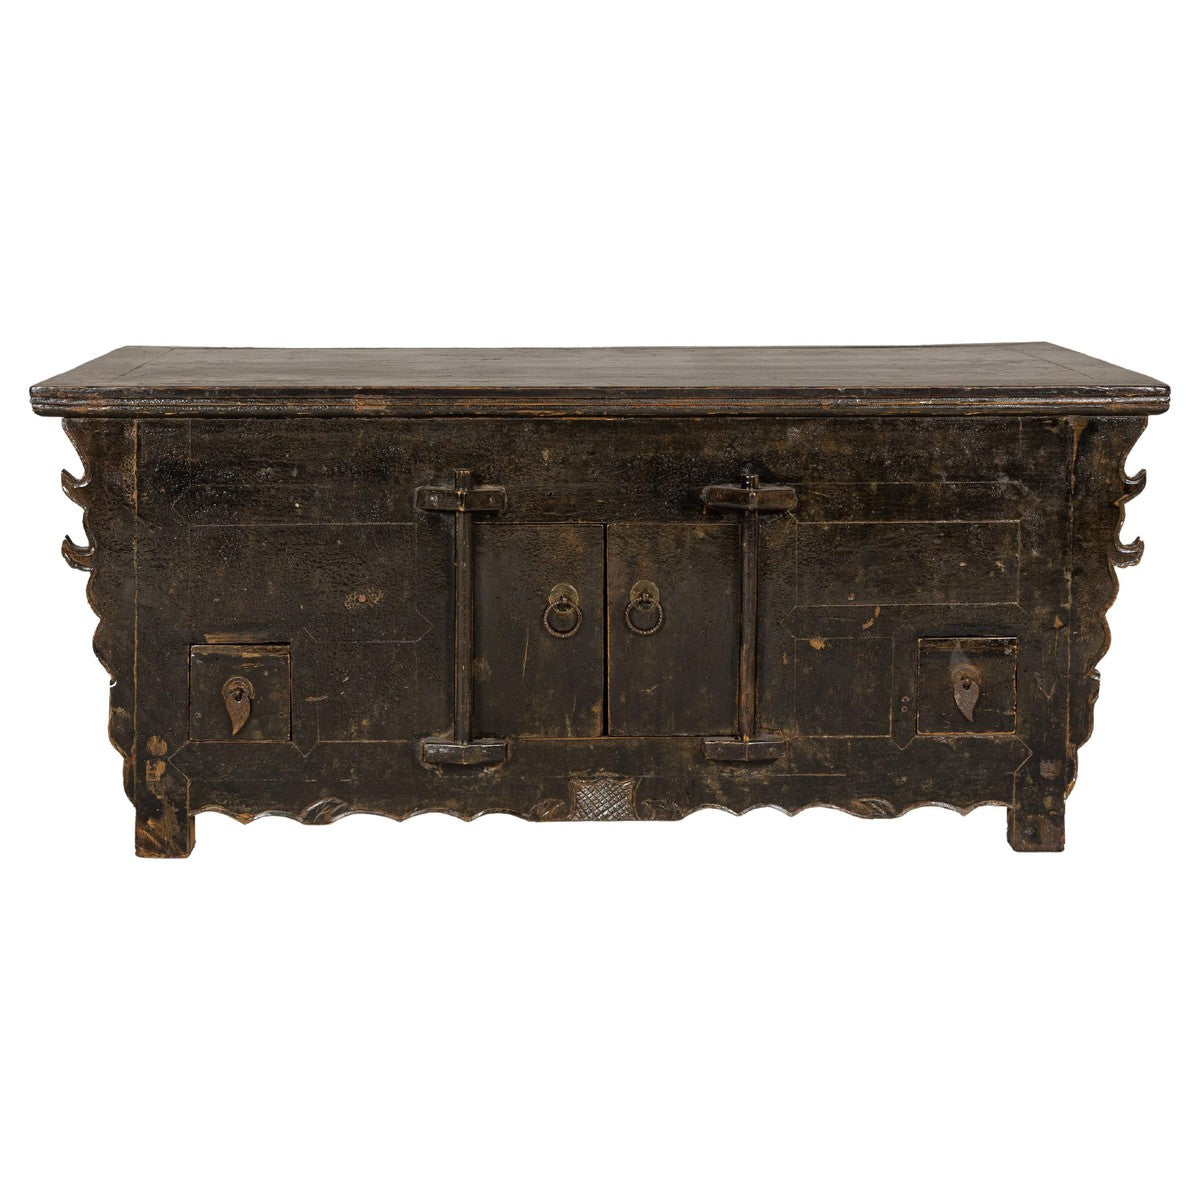 Low Kang Carved Sideboard with Brown Distressed Finish and Two Small Doors-YN7974-1. Asian & Chinese Furniture, Art, Antiques, Vintage Home Décor for sale at FEA Home